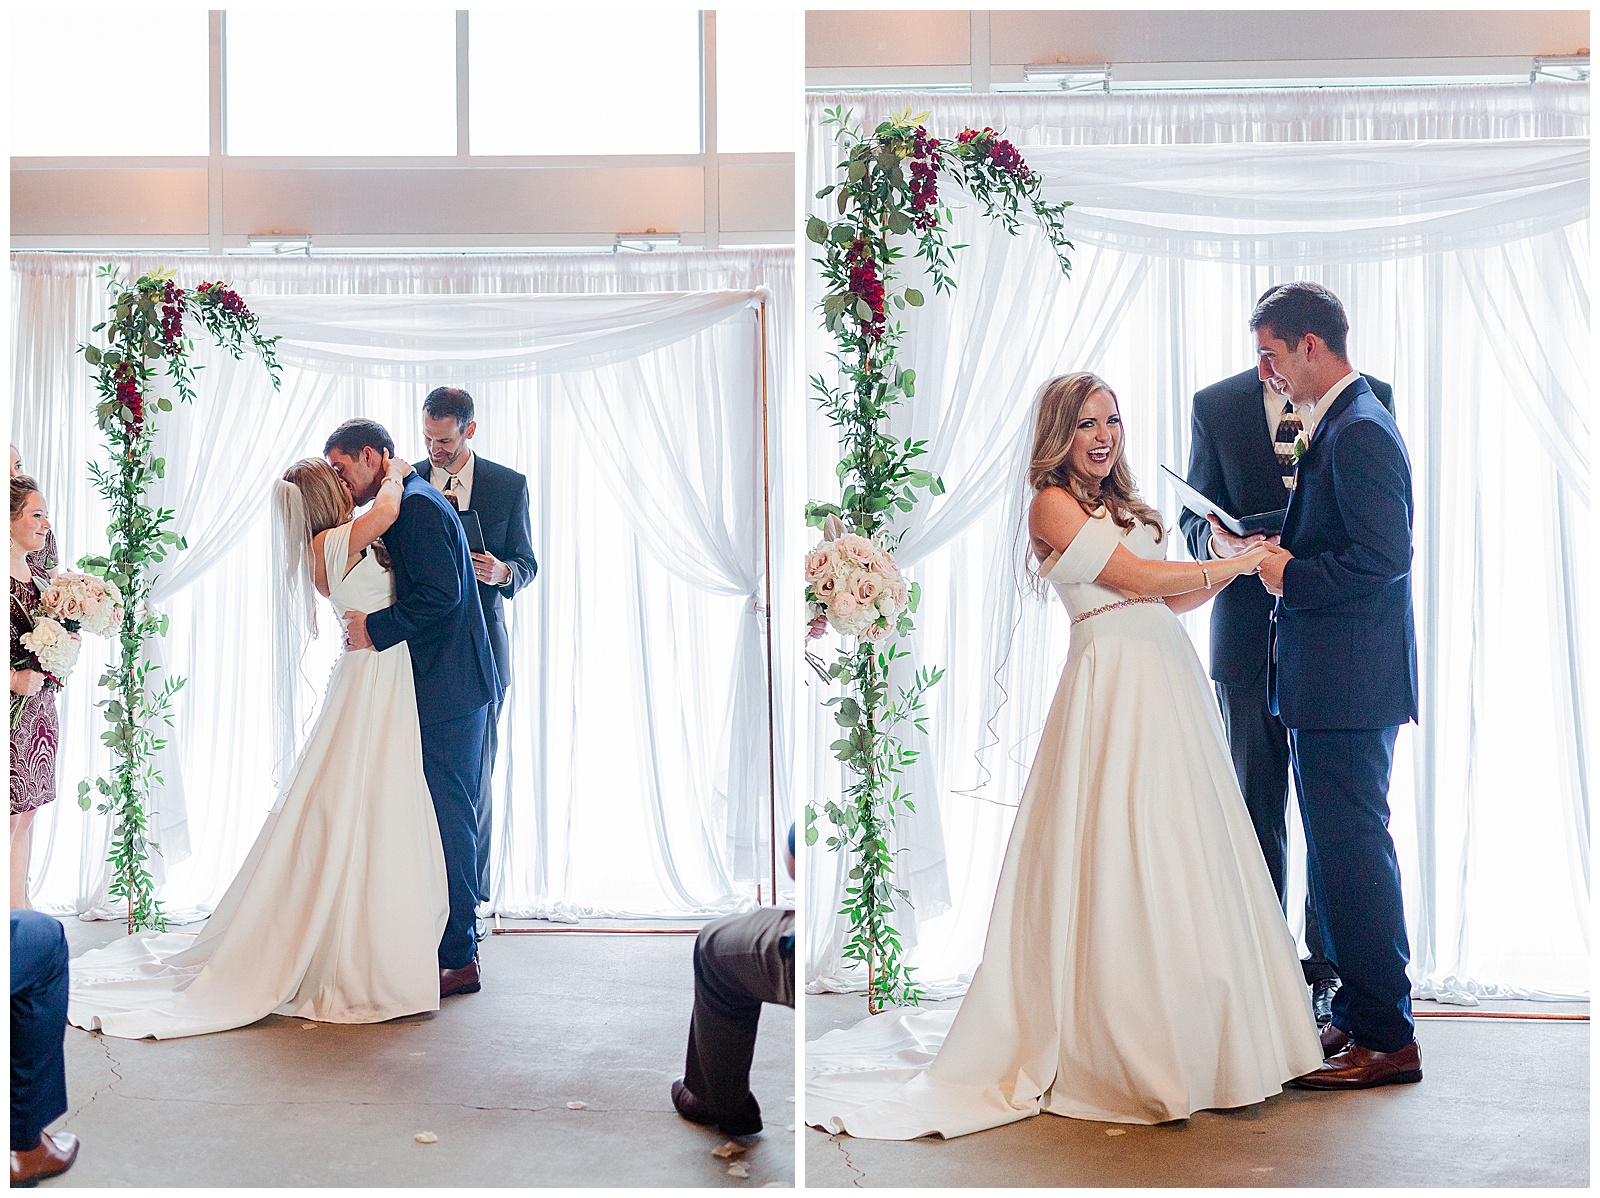 Bride and Groom during summer wedding ceremony in stunning indoor venue with fairy lights in Charlotte, NC | Check out the full wedding at KevynDixonPhoto.com